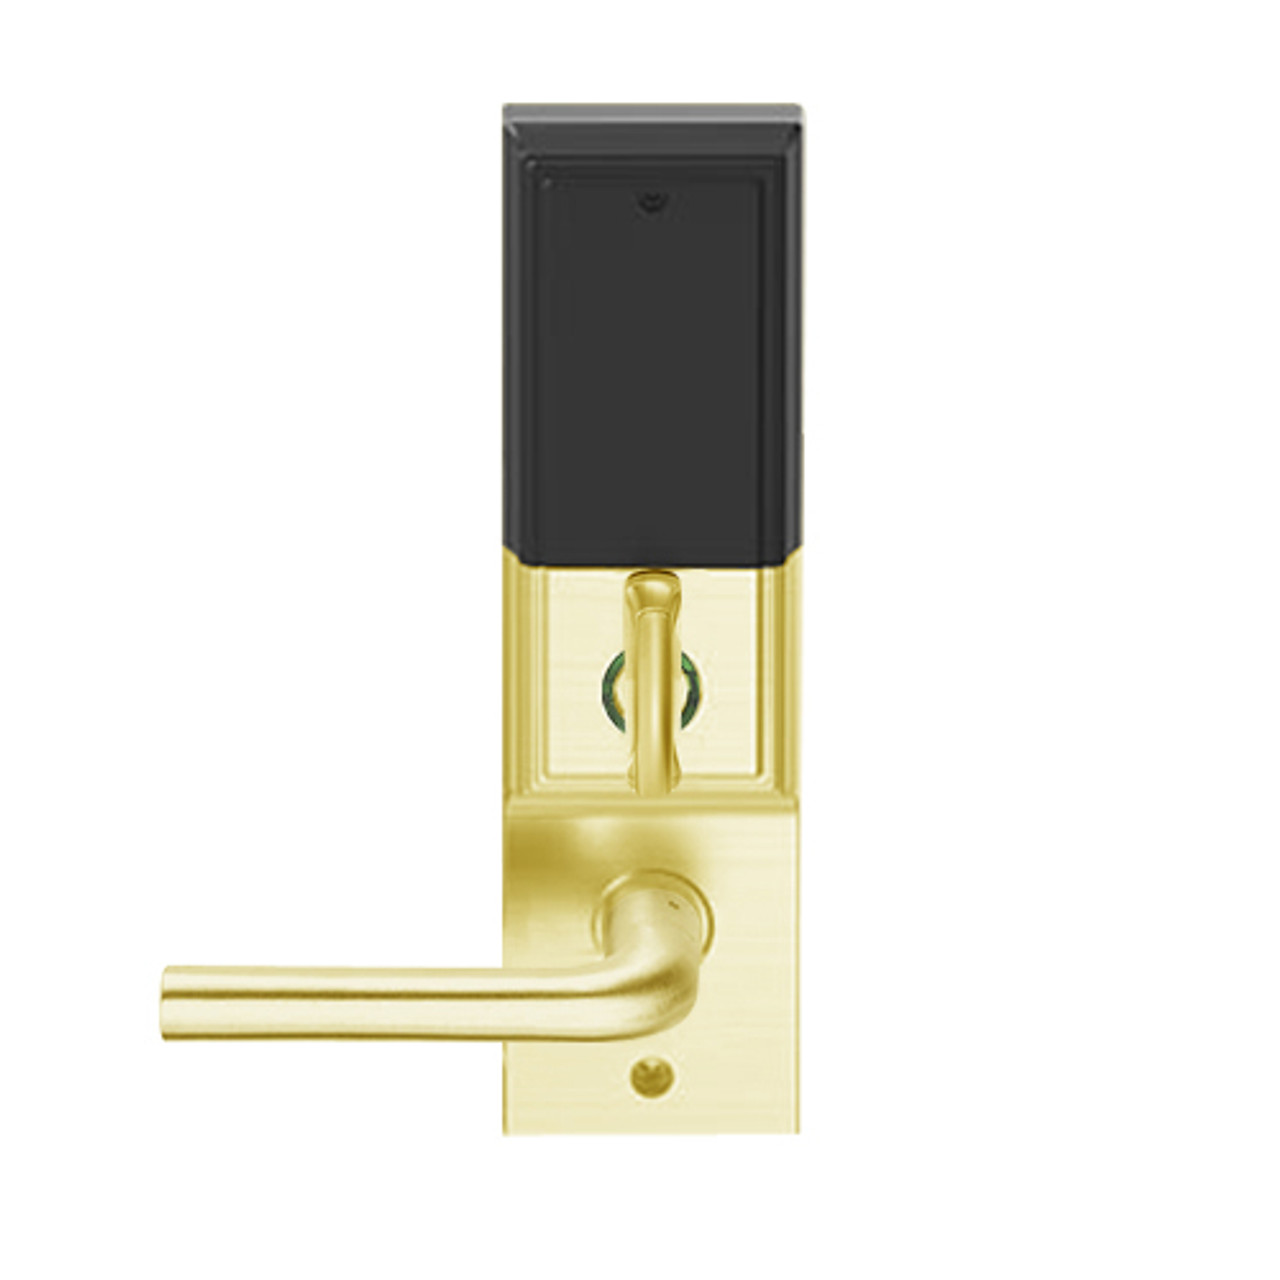 LEMD-ADD-L-02-605 Schlage Less Mortise Cylinder Privacy/Apartment Wireless Addison Mortise Deadbolt Lock with LED and 02 Lever in Bright Brass